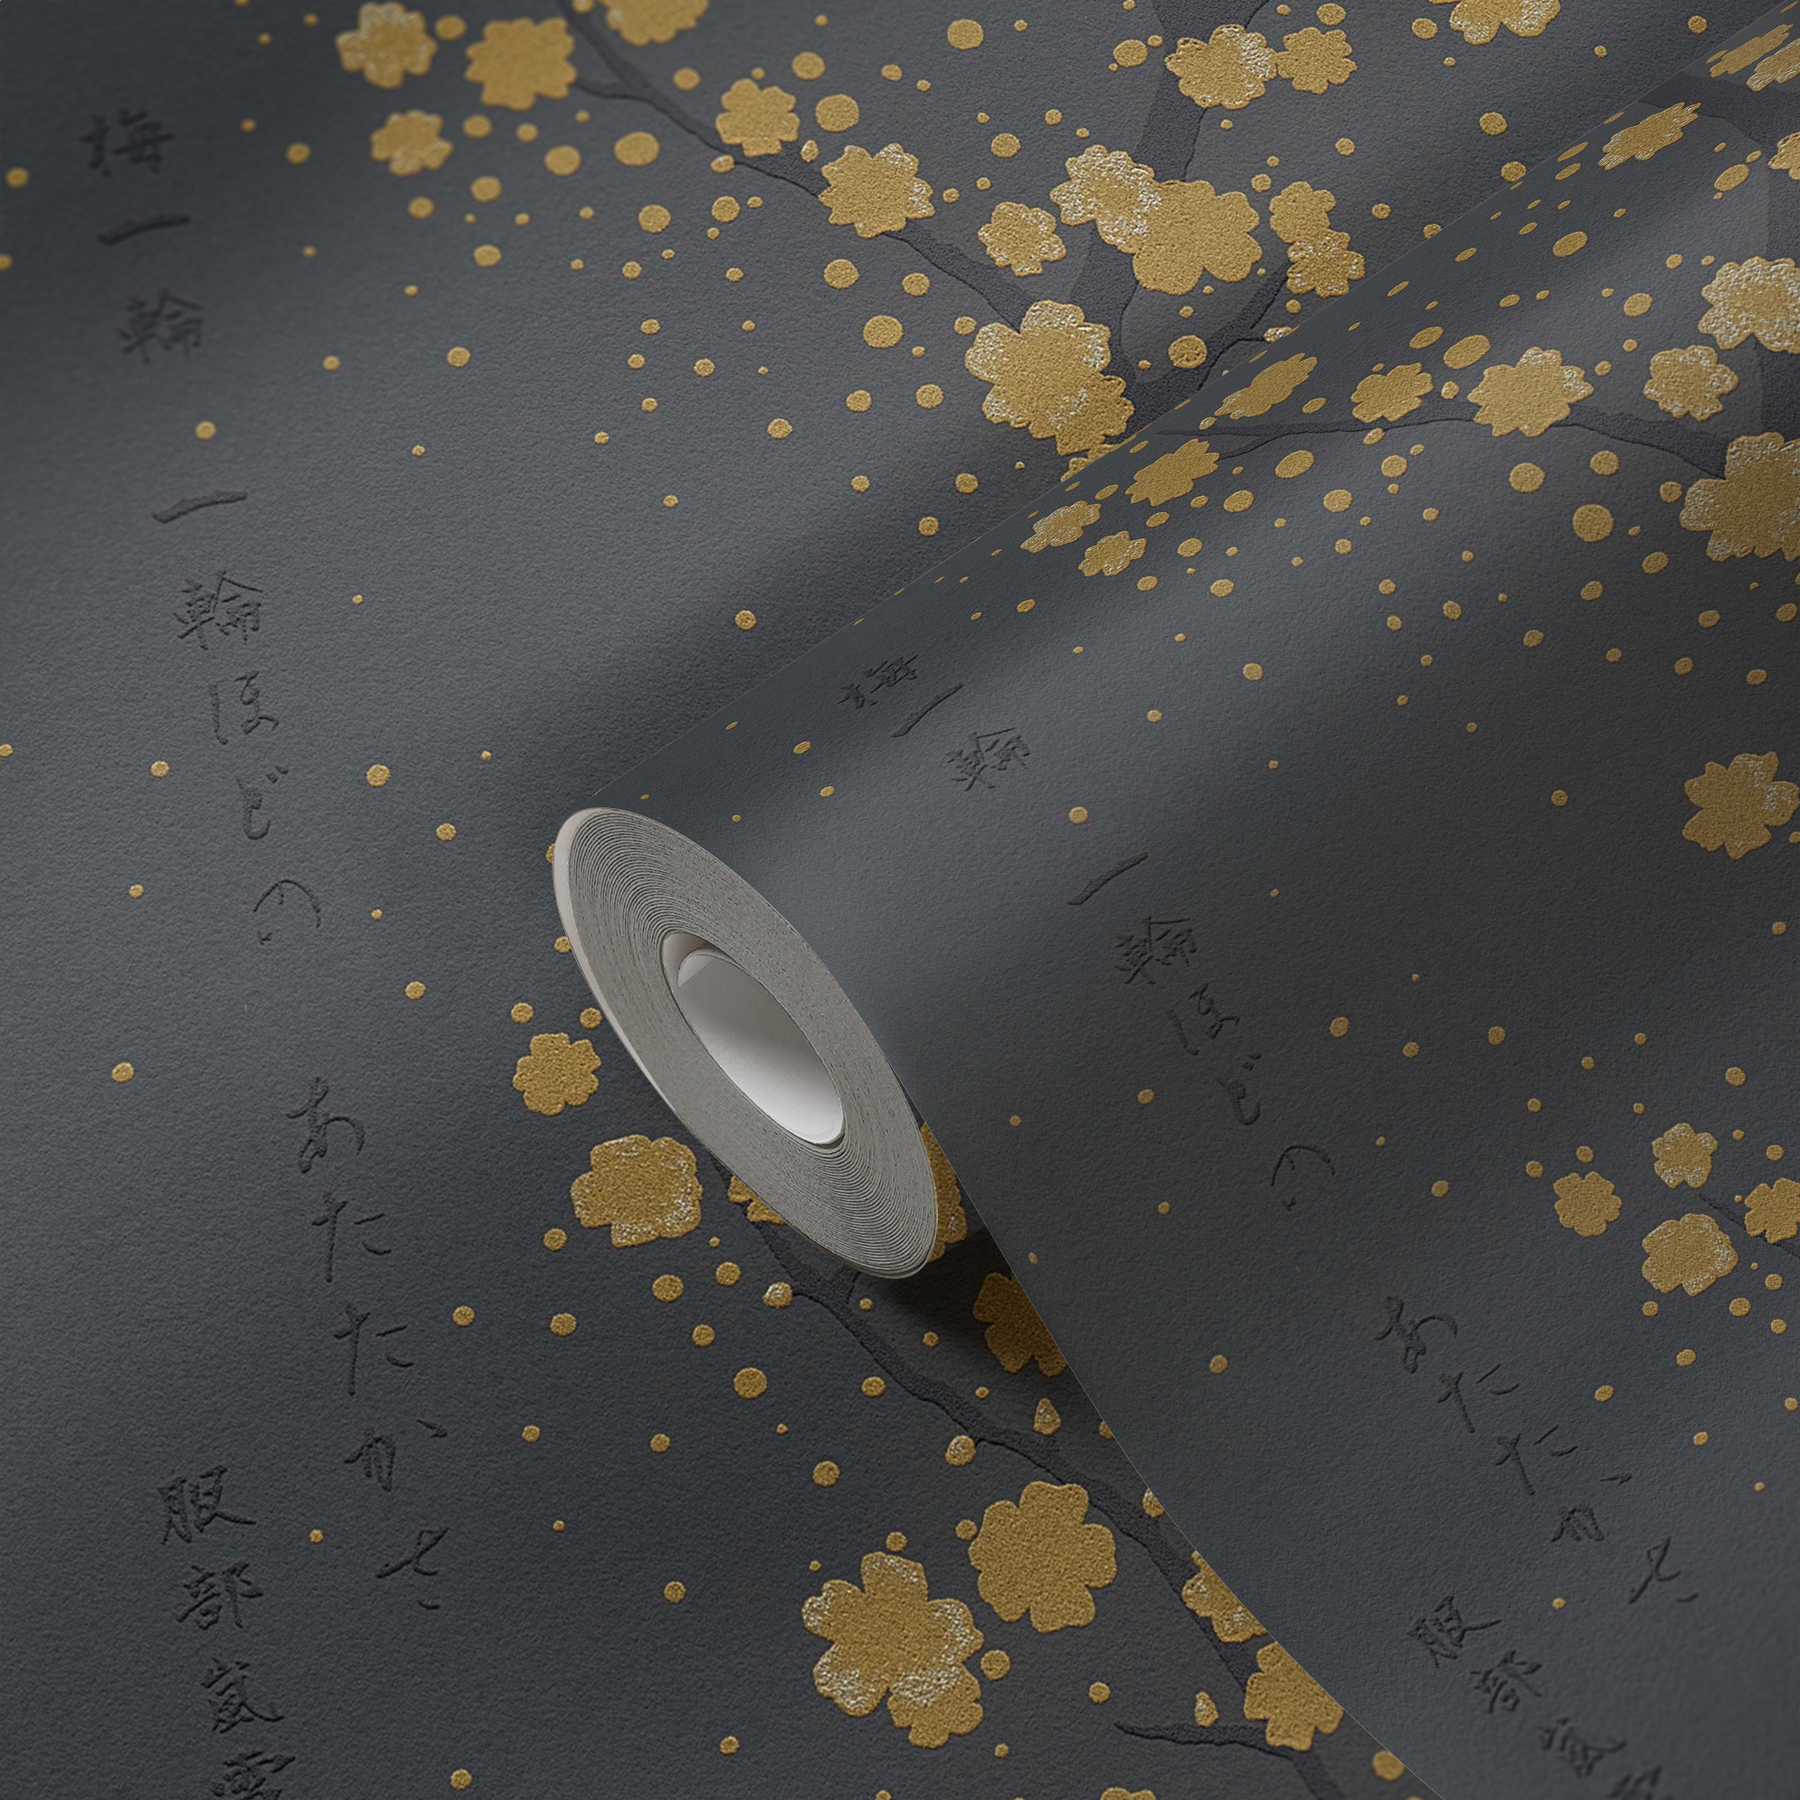             Wallpaper cherry blossoms & branches, Asian characters - Black, Gold
        